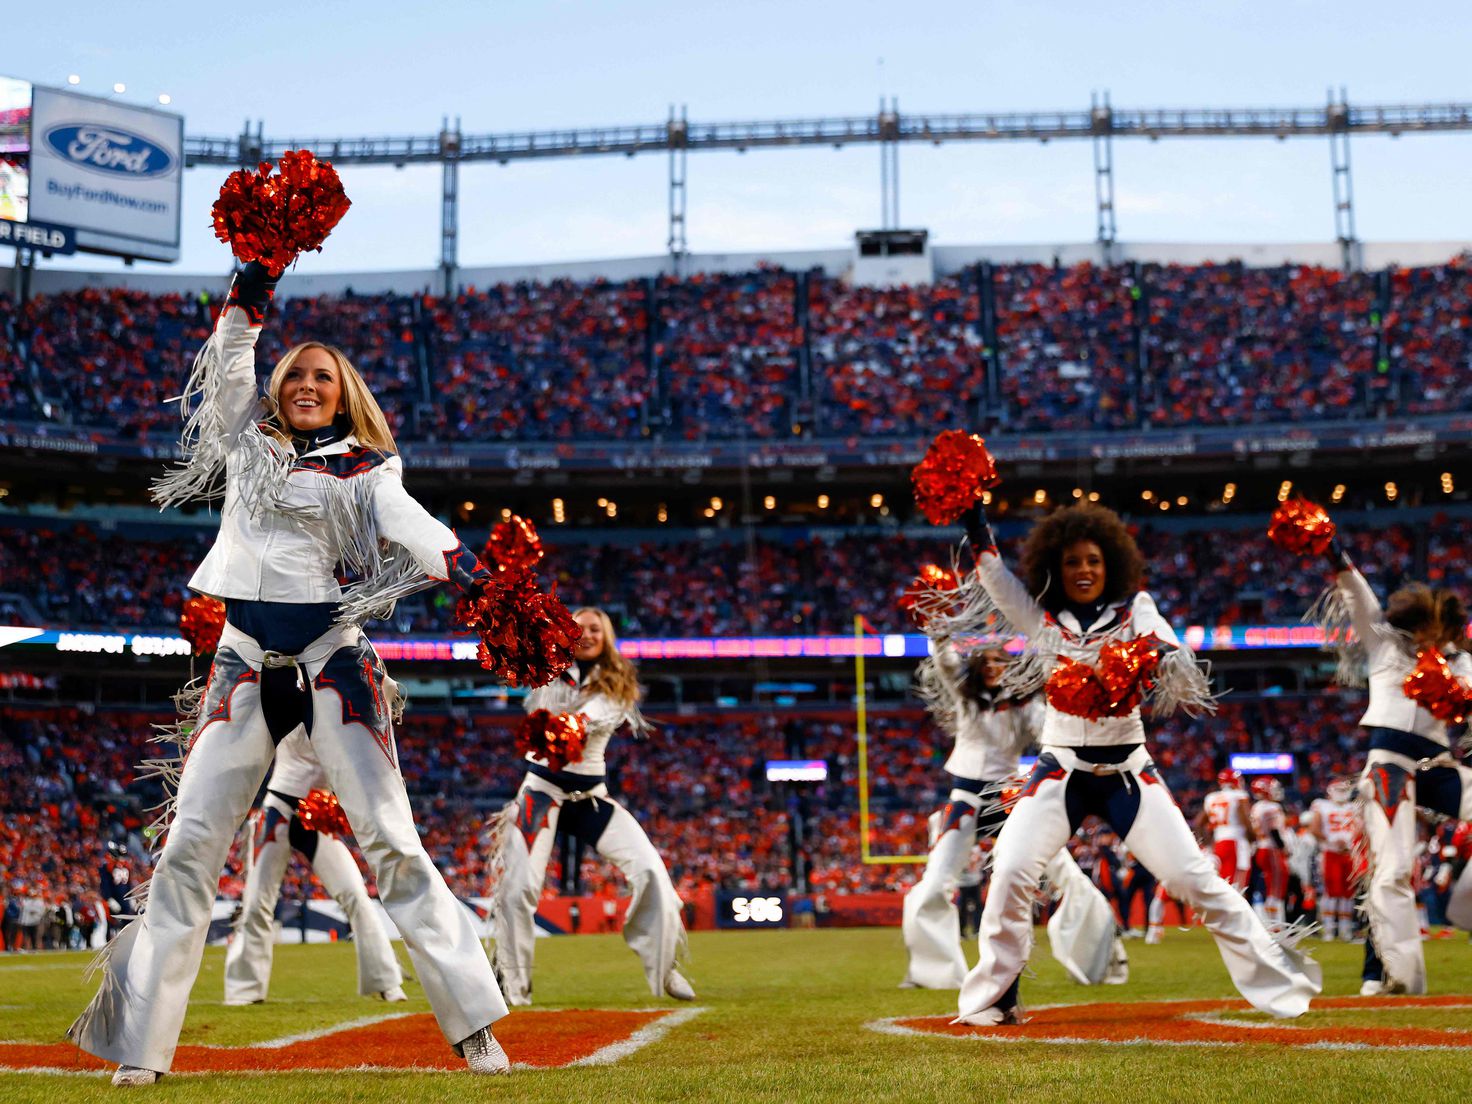 What are the rules for NFL cheerleaders? Dating NFL players